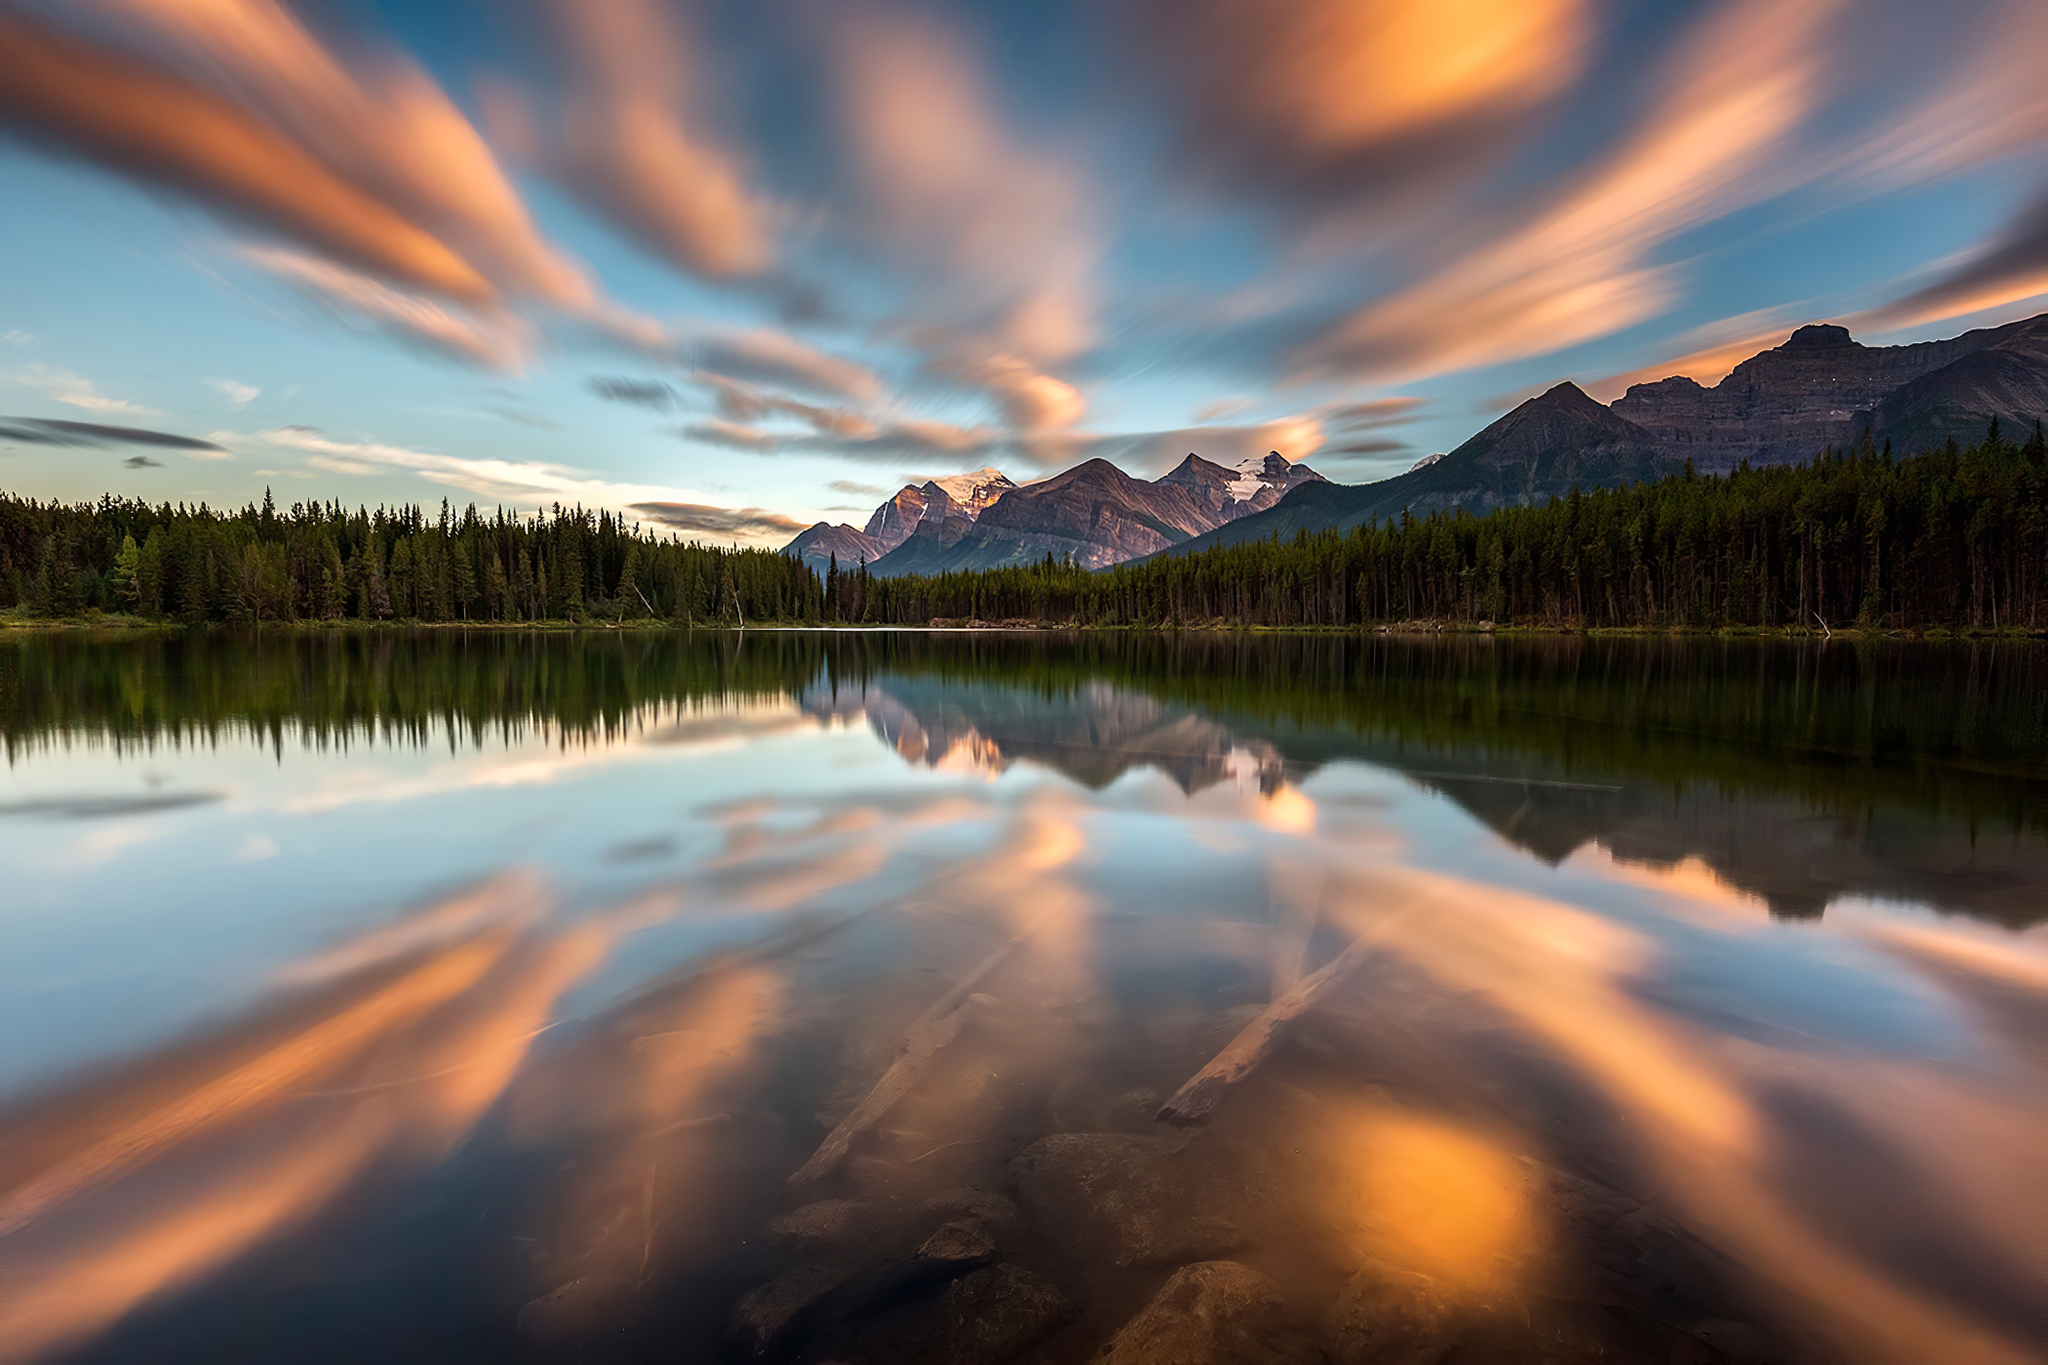 General 2048x1365 pine trees nature clouds sky lake landscape mountains reflection trees water Banff Banff National Park Alberta Canada